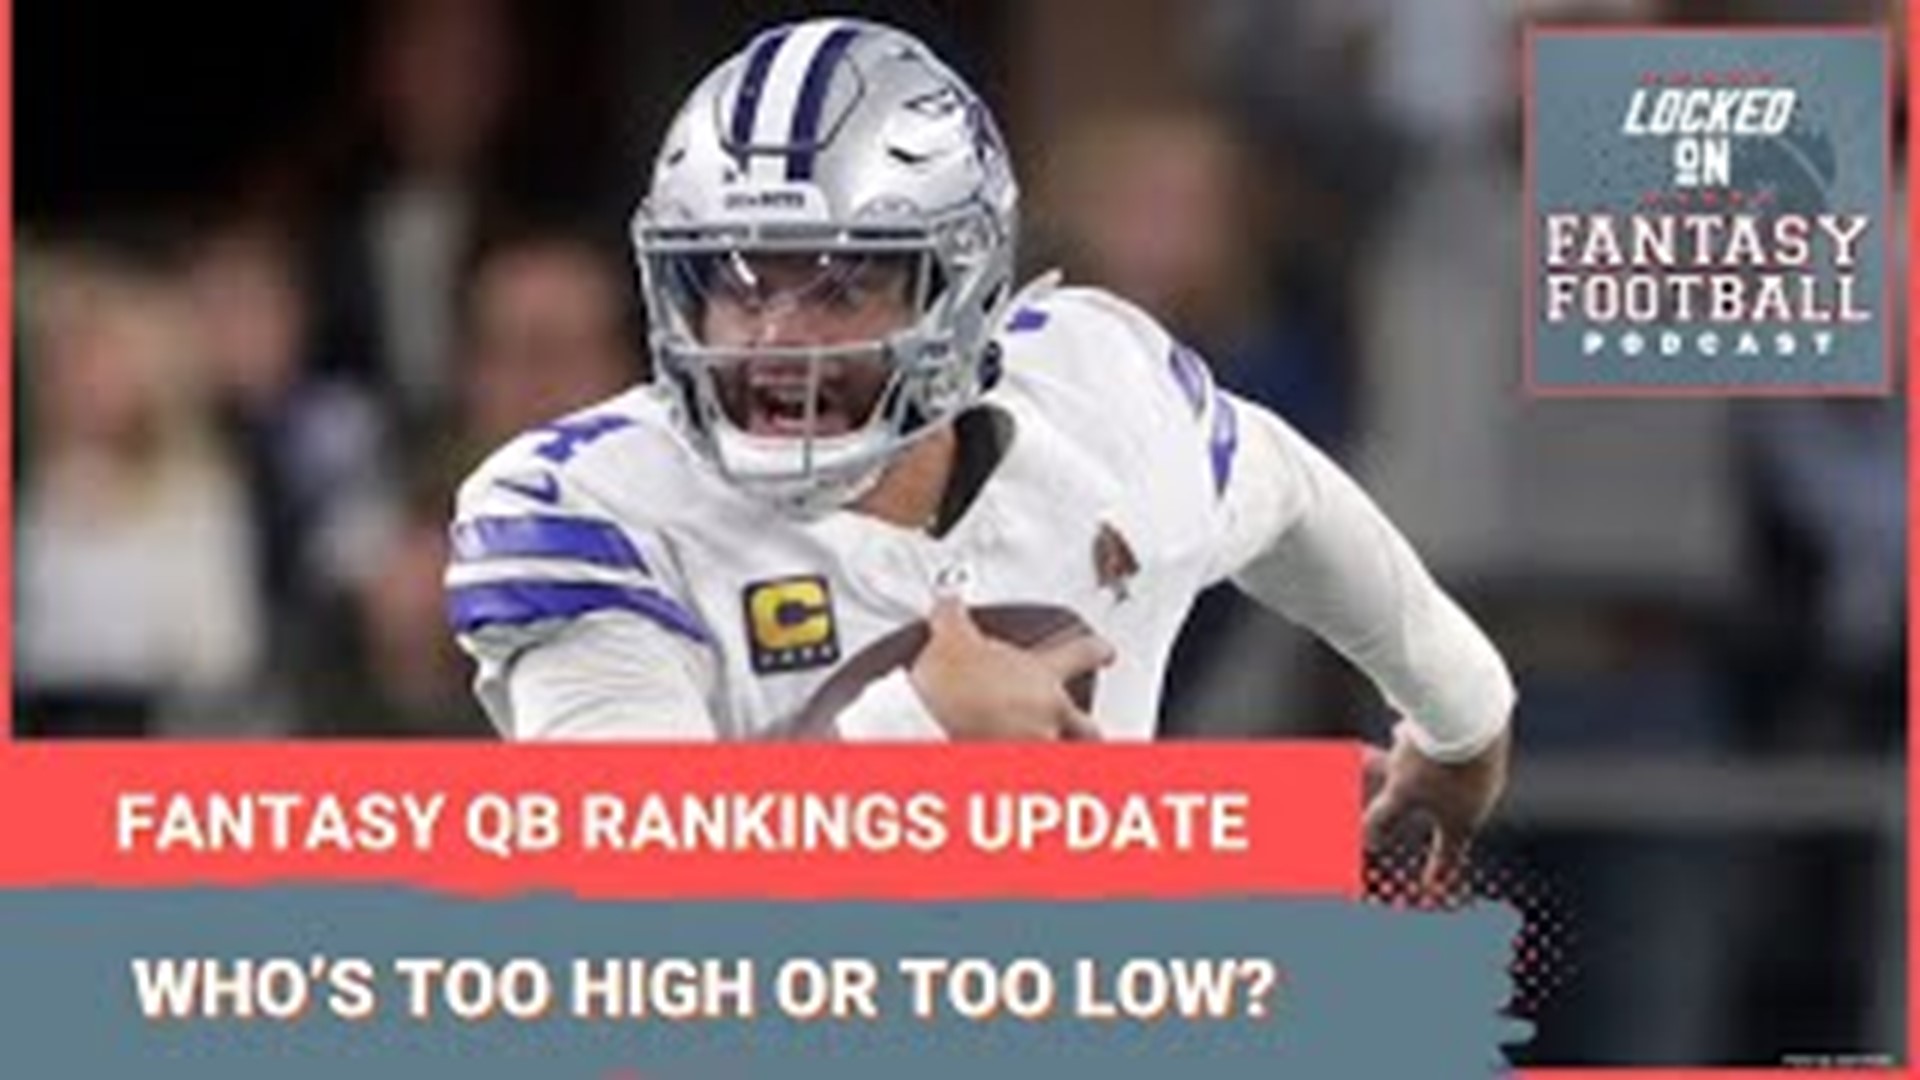 Sporting News.com's Vinnie Iyer and NFL.com's Michelle Magdziuk take a look at the early consensus fantasy football rankings at quarterback.